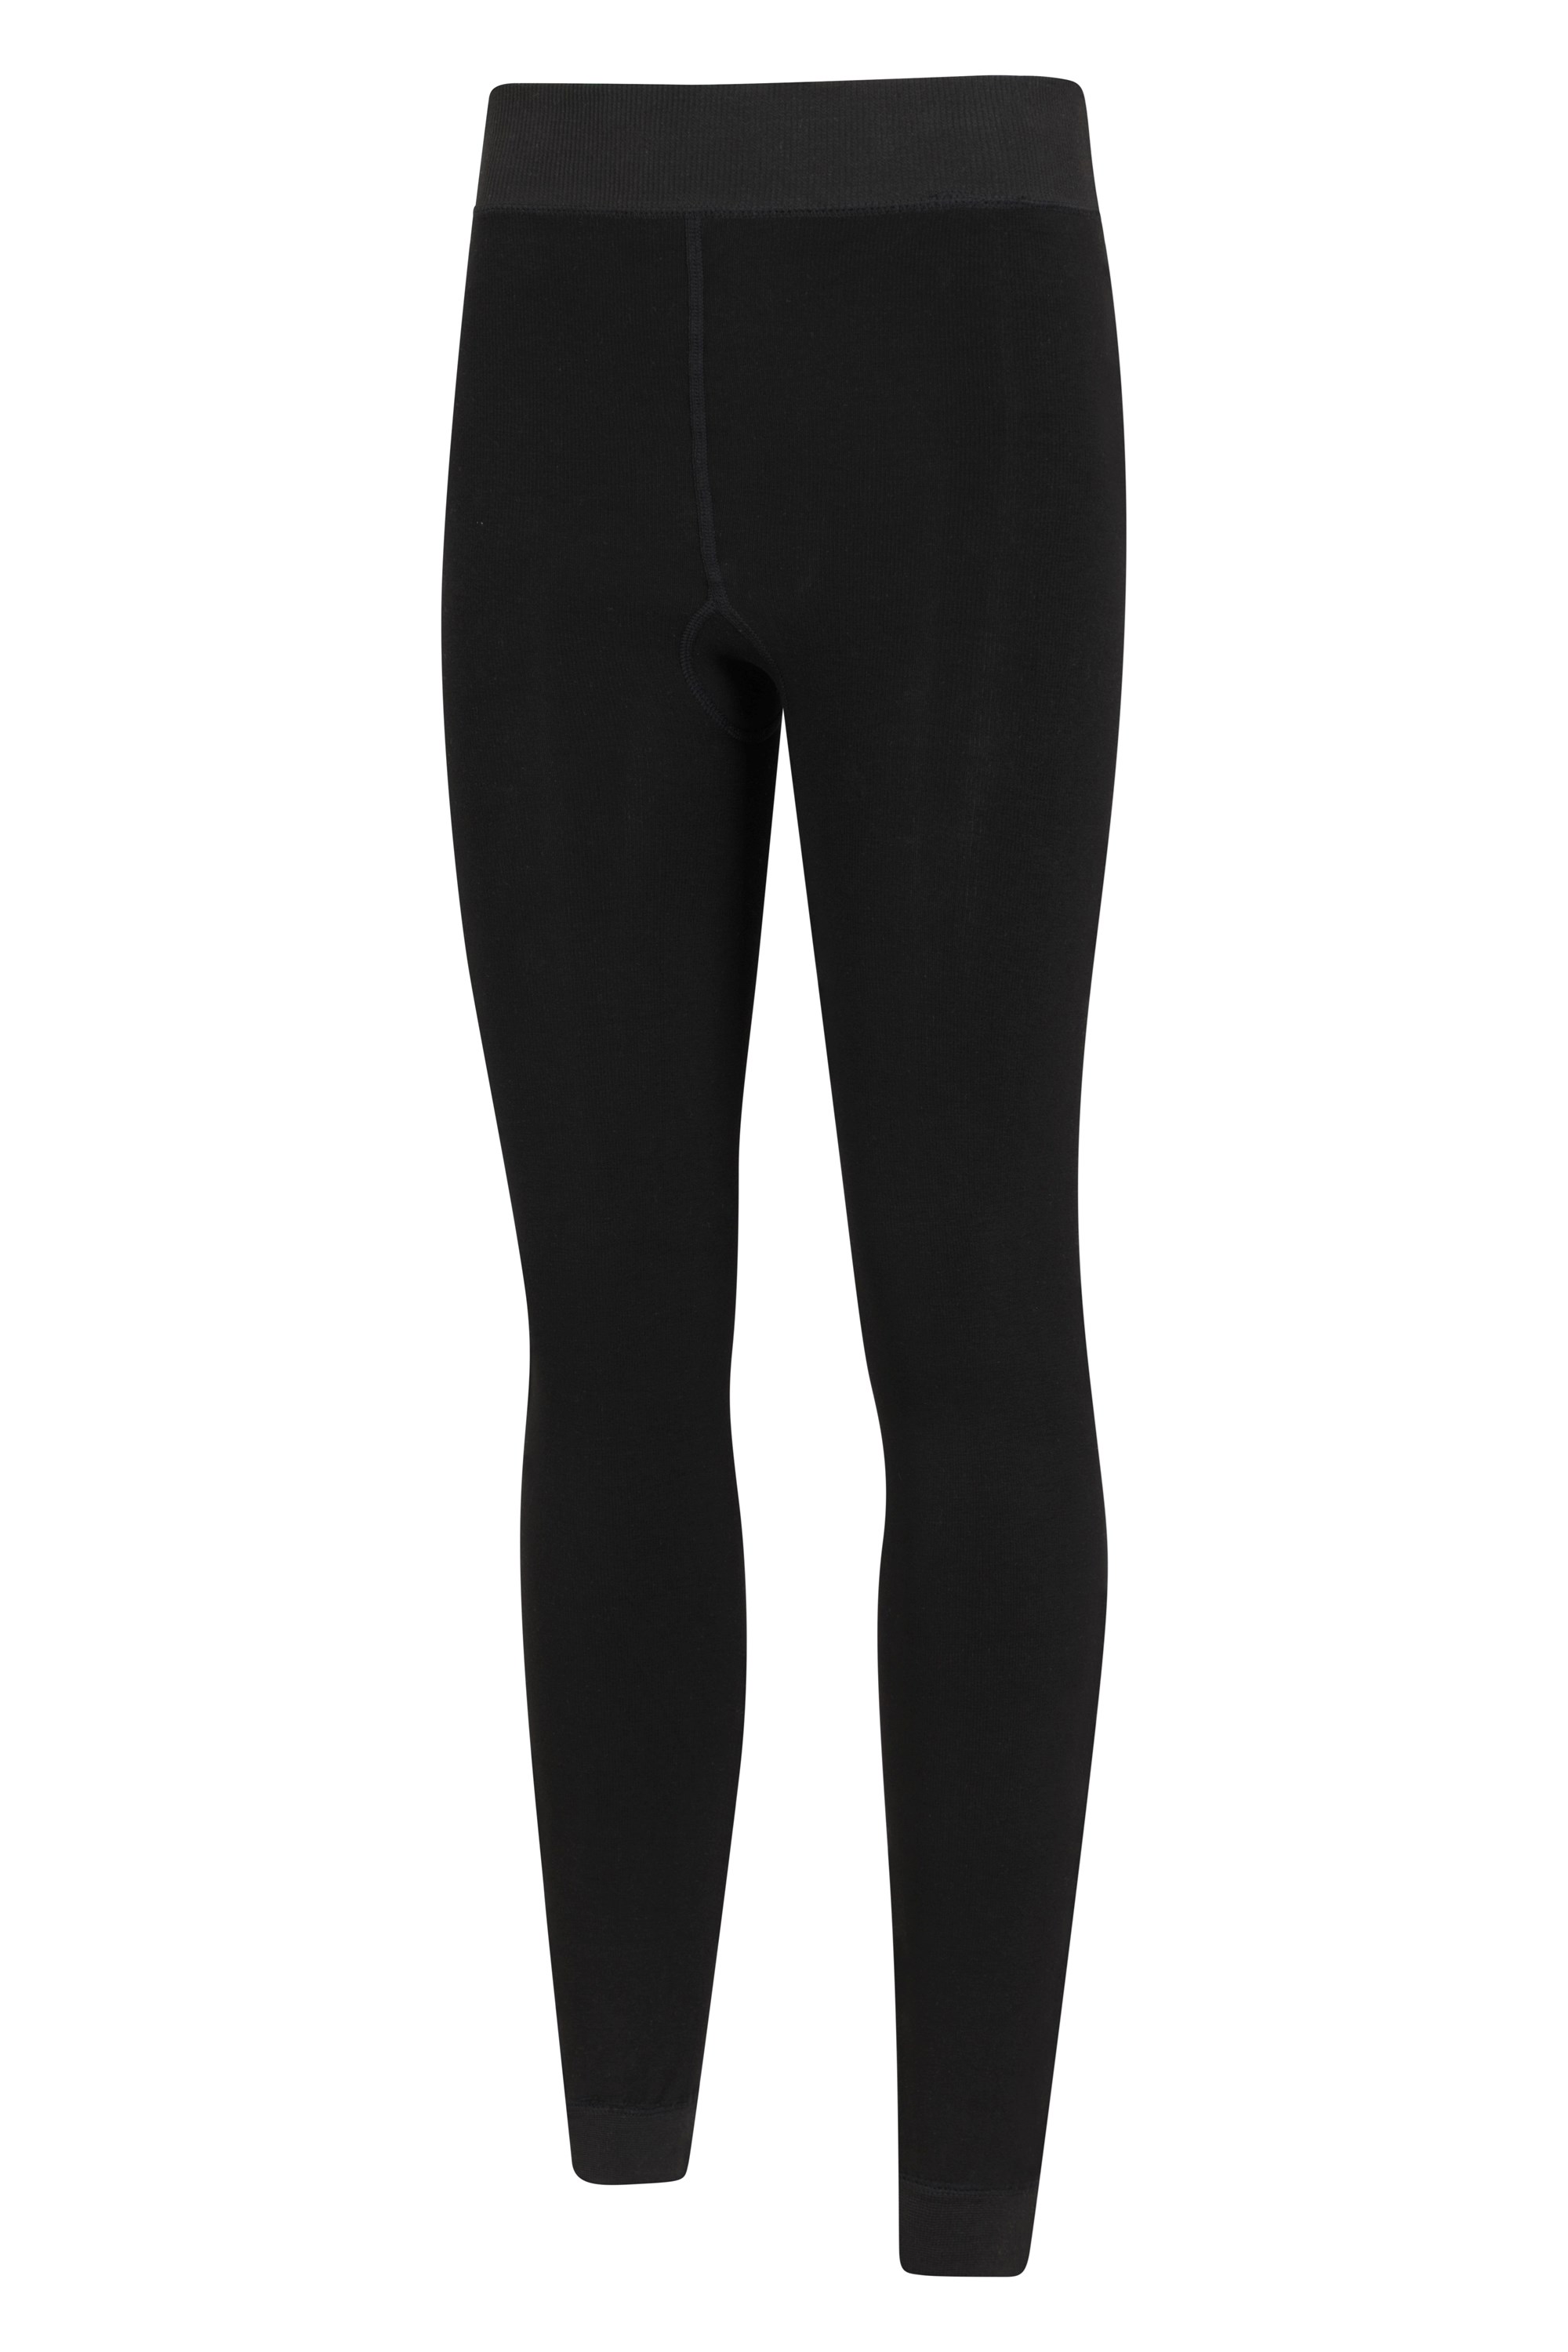 Women's Plus Size Fleece Lined Thermal Tights Black